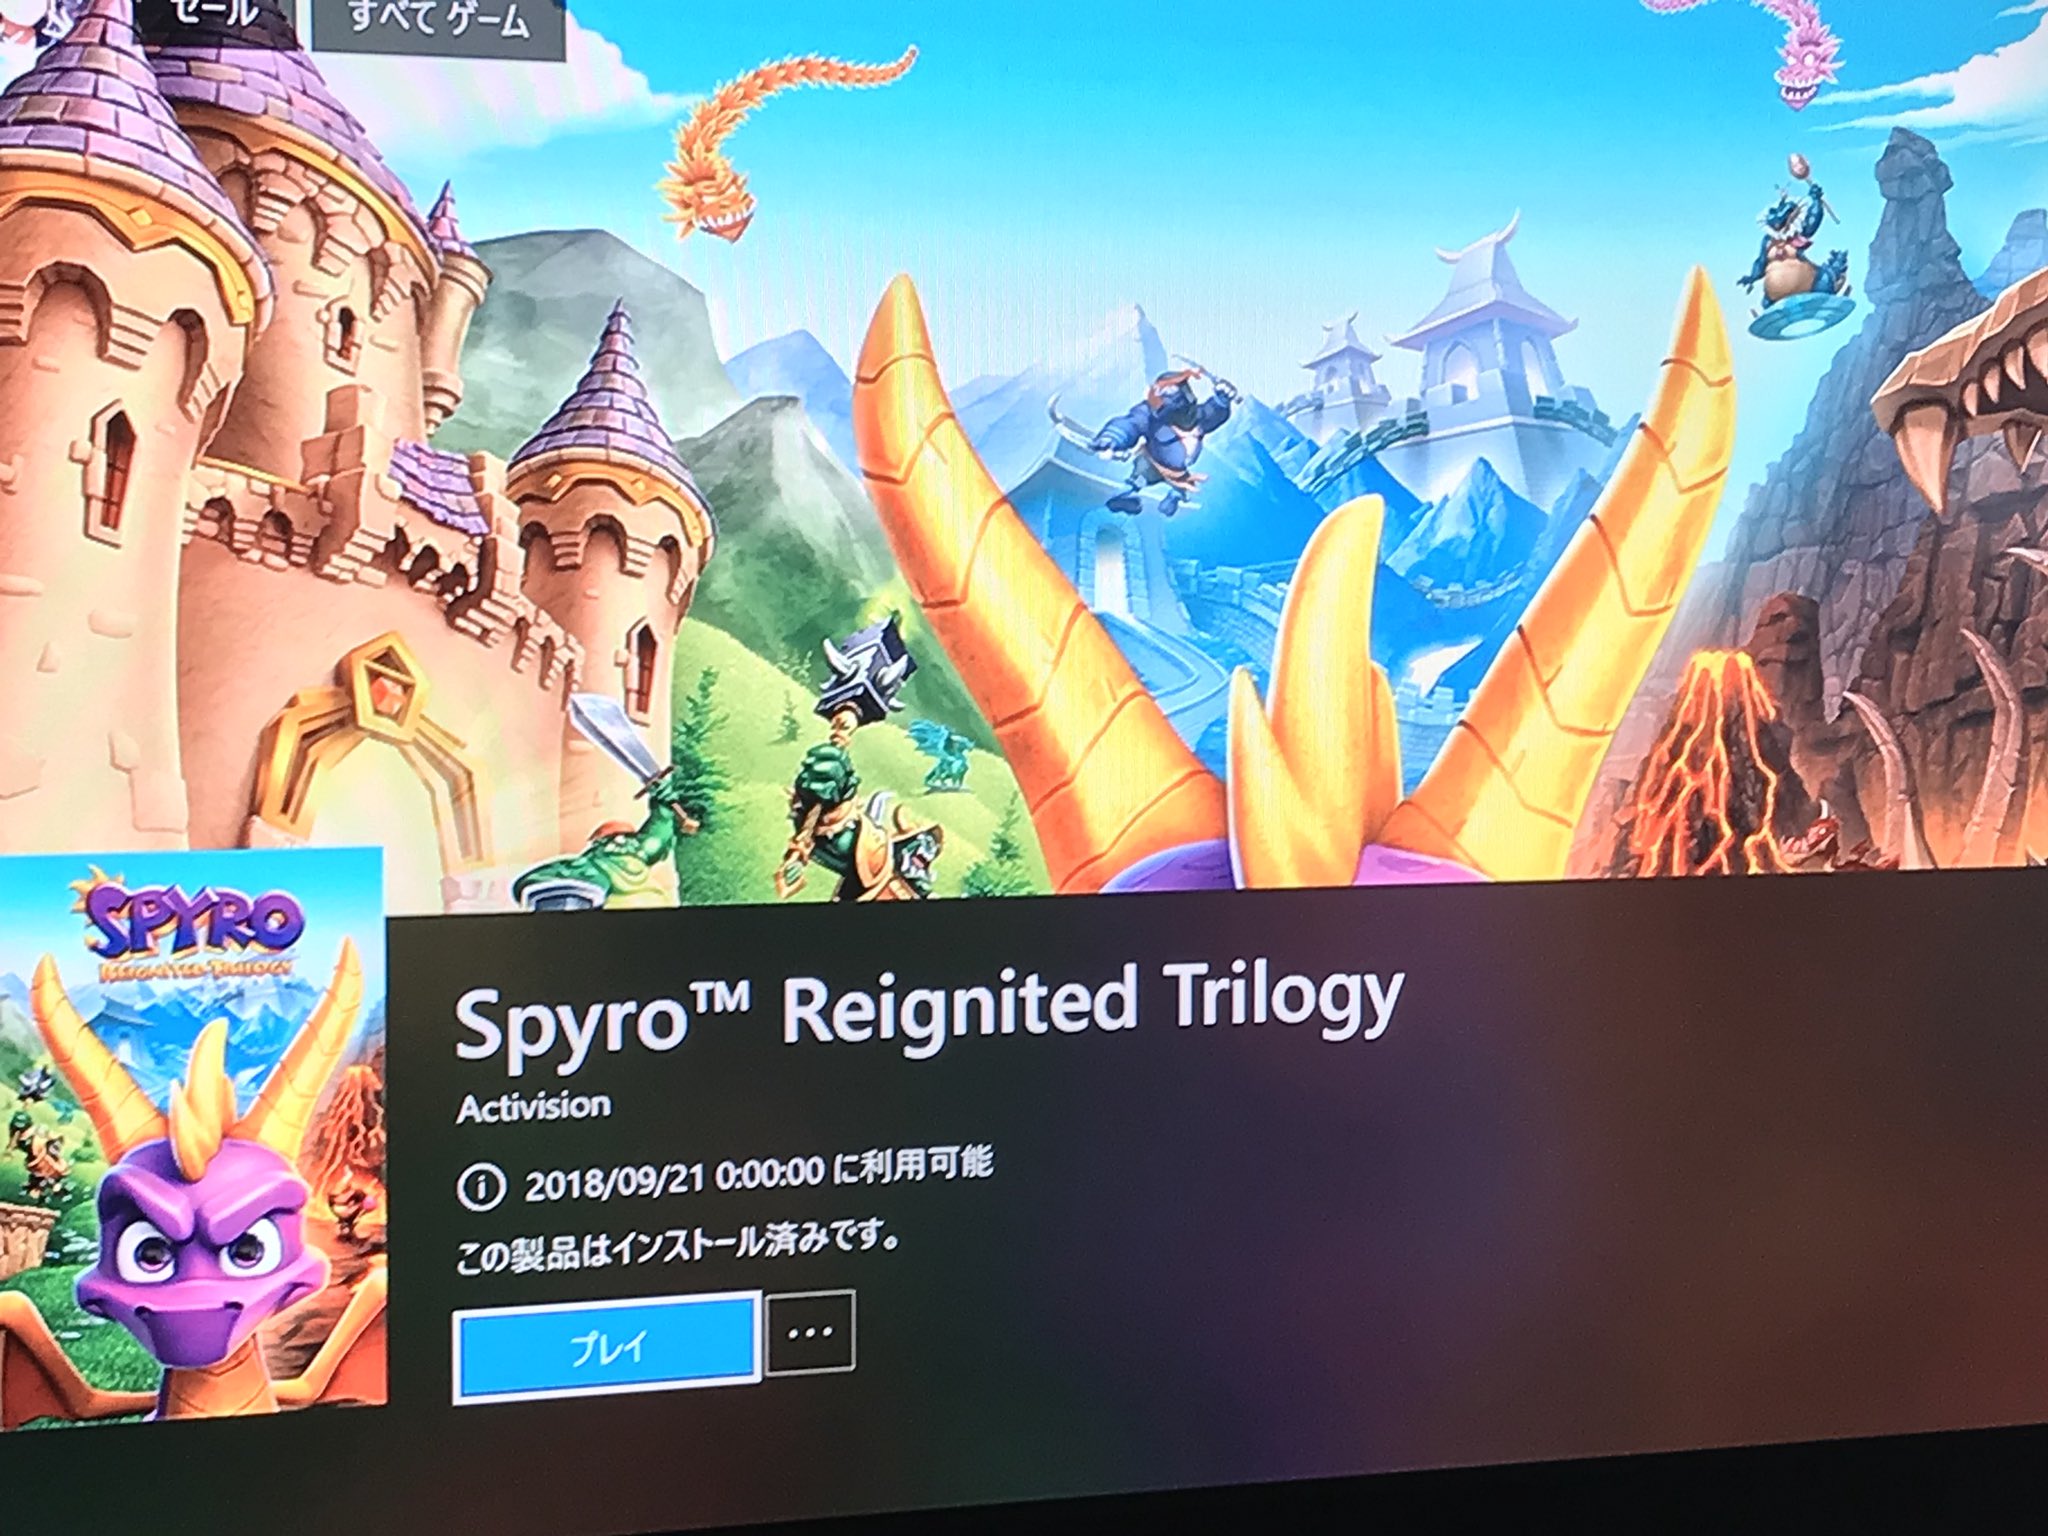 Spyro Universe 💎 on Twitter: "PlayStation Japan's PSN store now has Spyro Reignited Trilogy Available for preorder! Note: will be the first time Year of the Dragon will be launched in